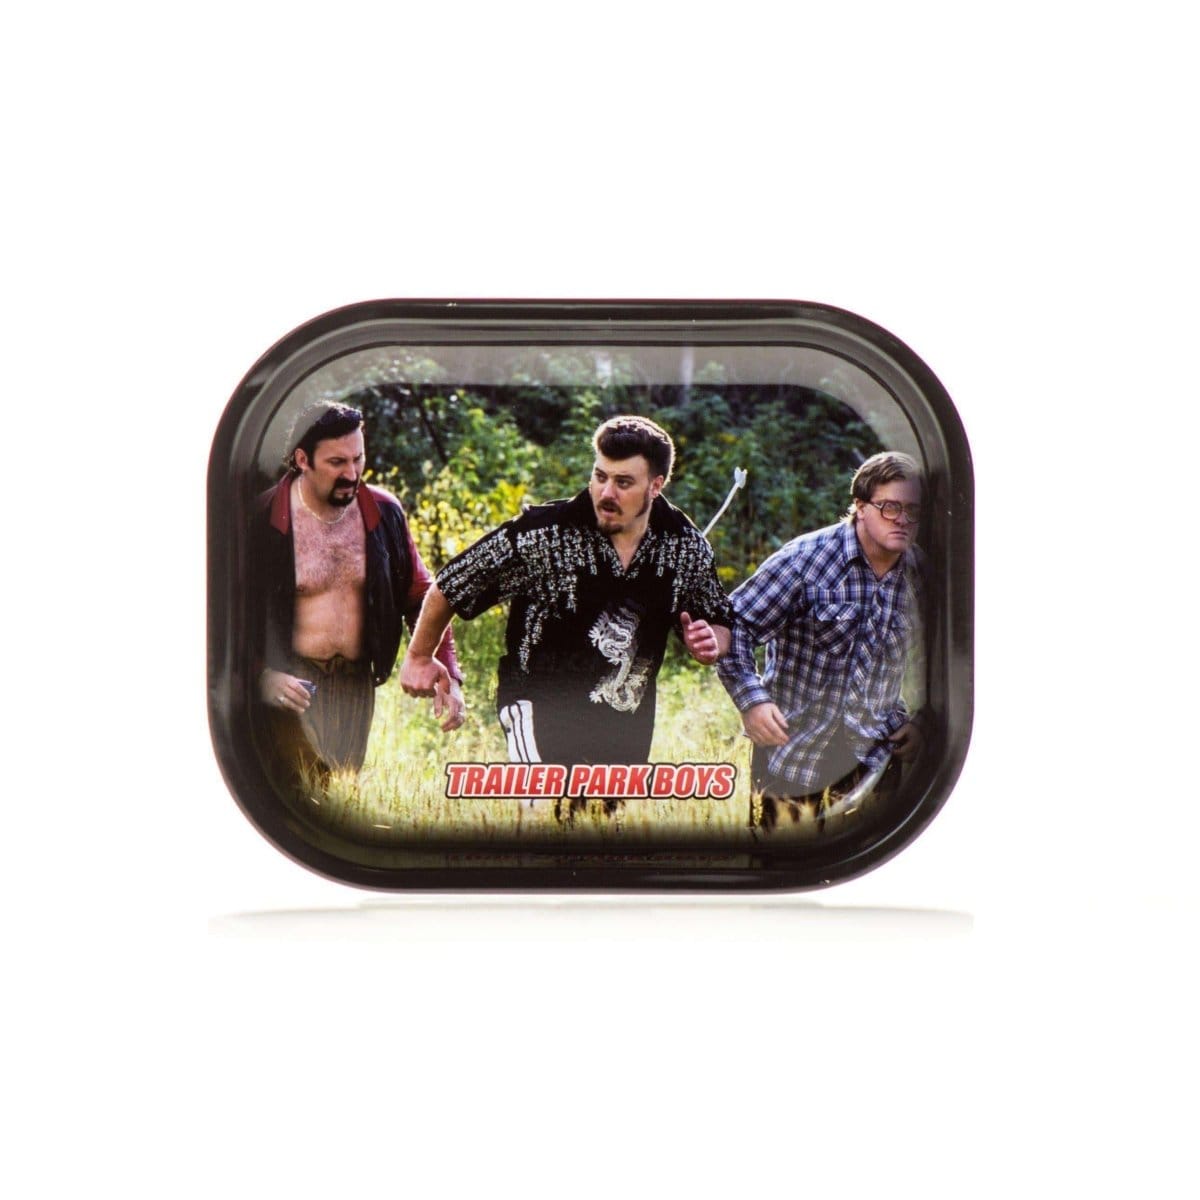 Trailer Park Boys Rolling Tray Small Hustle Rolling Tray